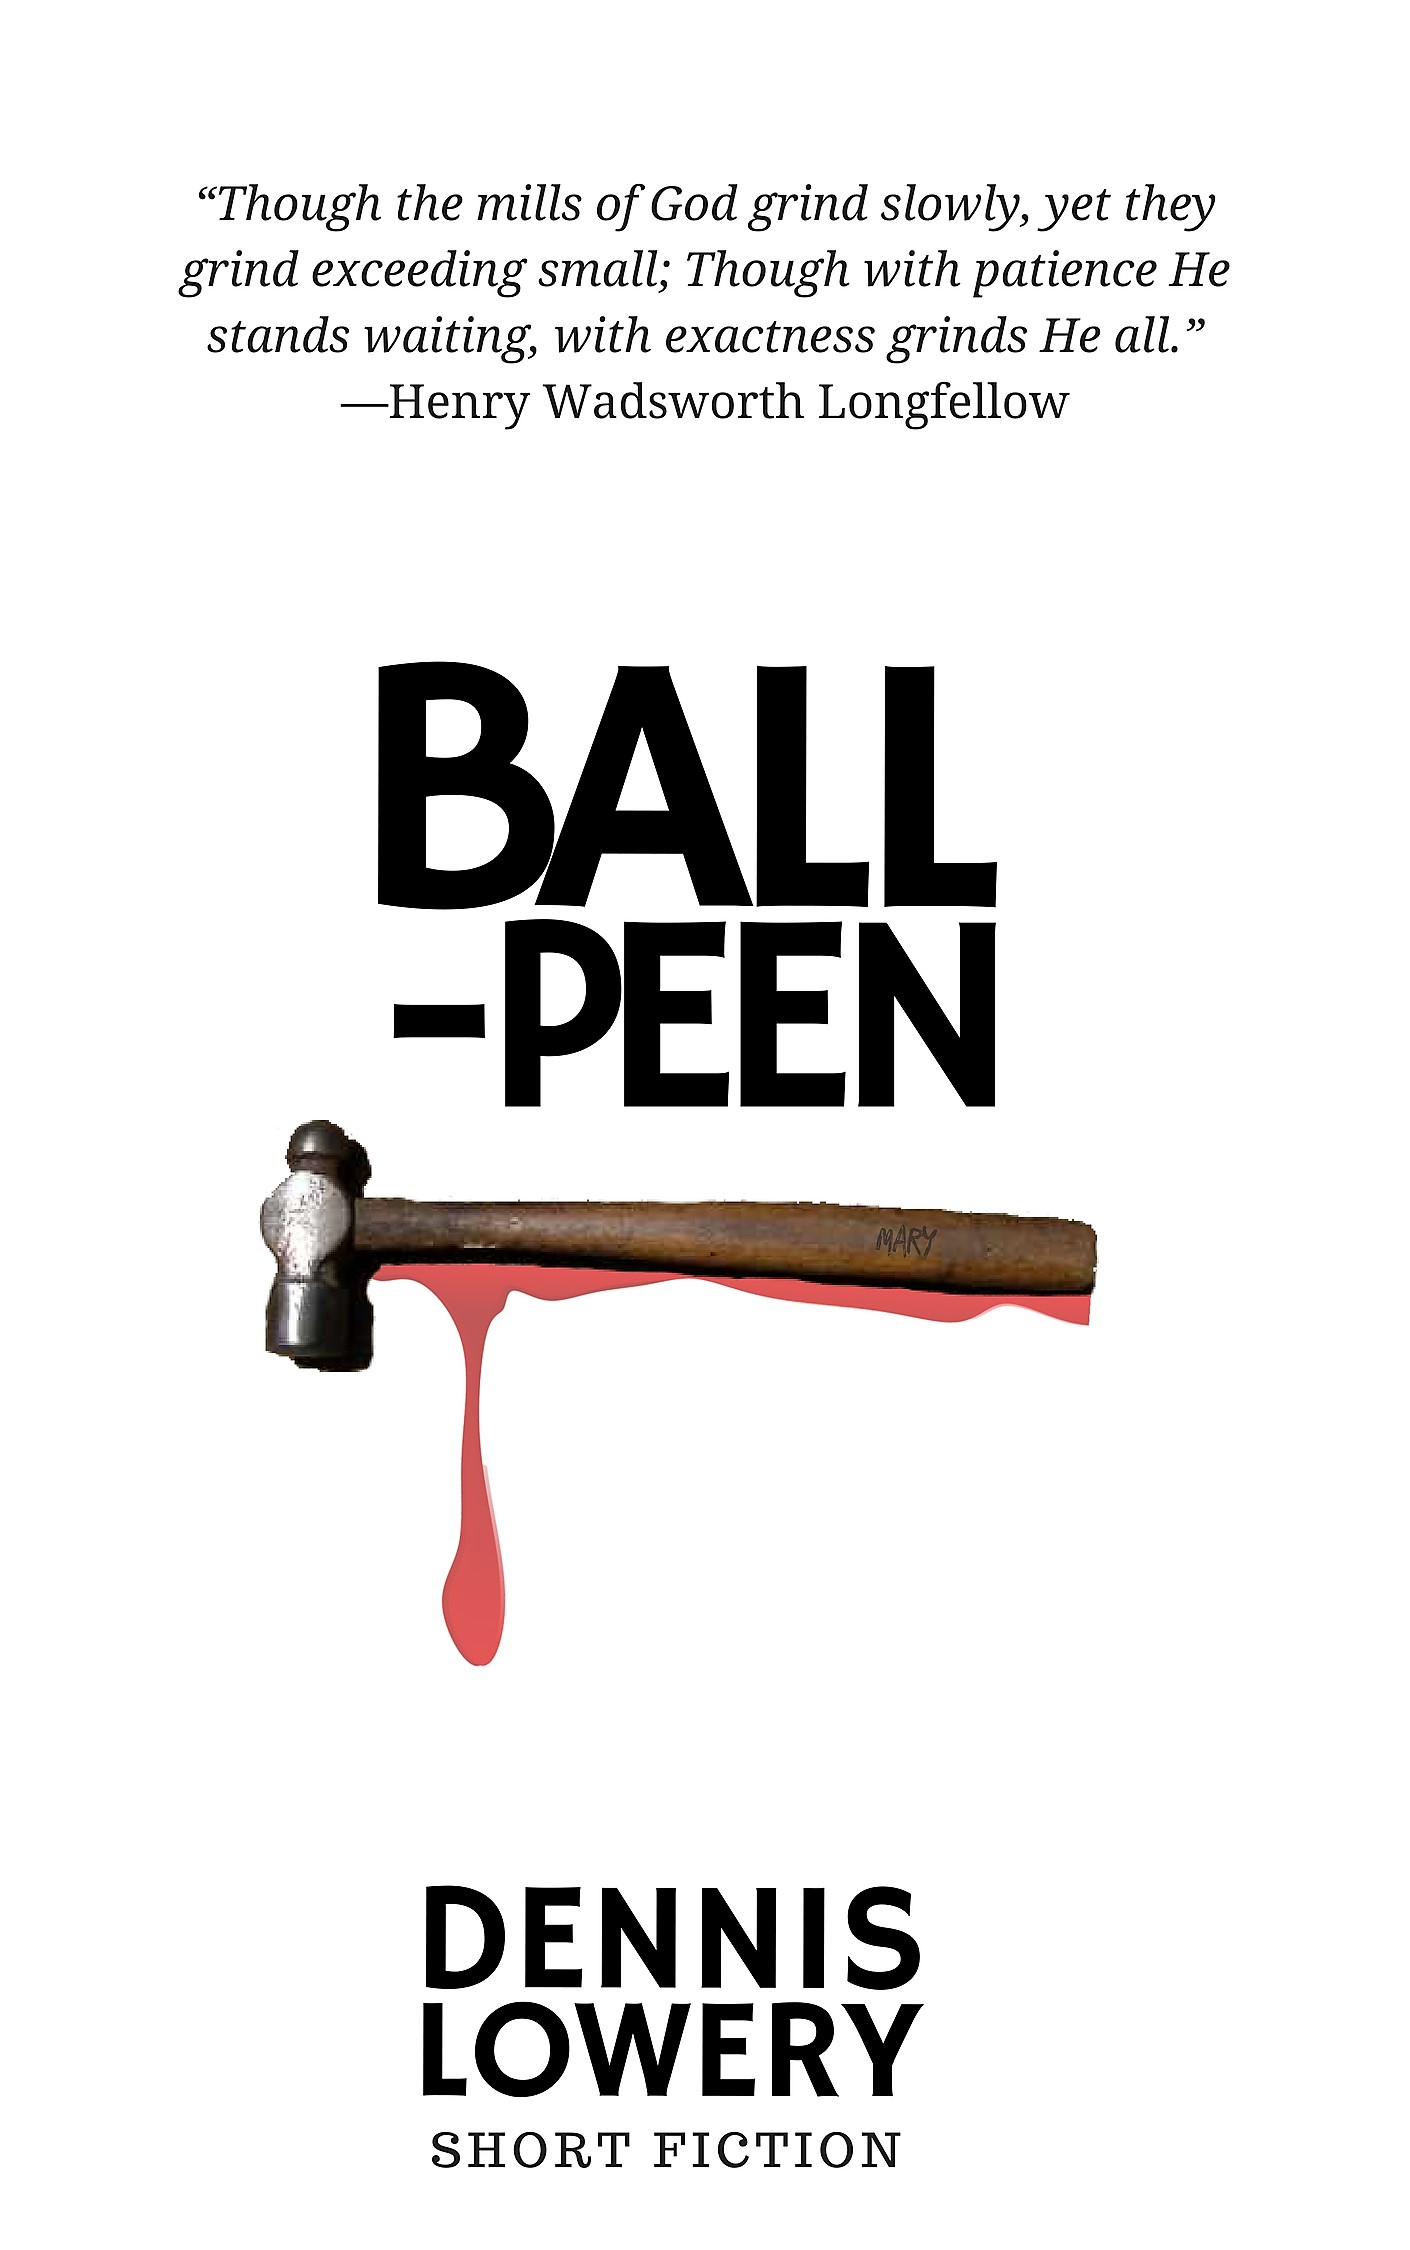 BALL PEEN - Short Fiction by Dennis Lowery